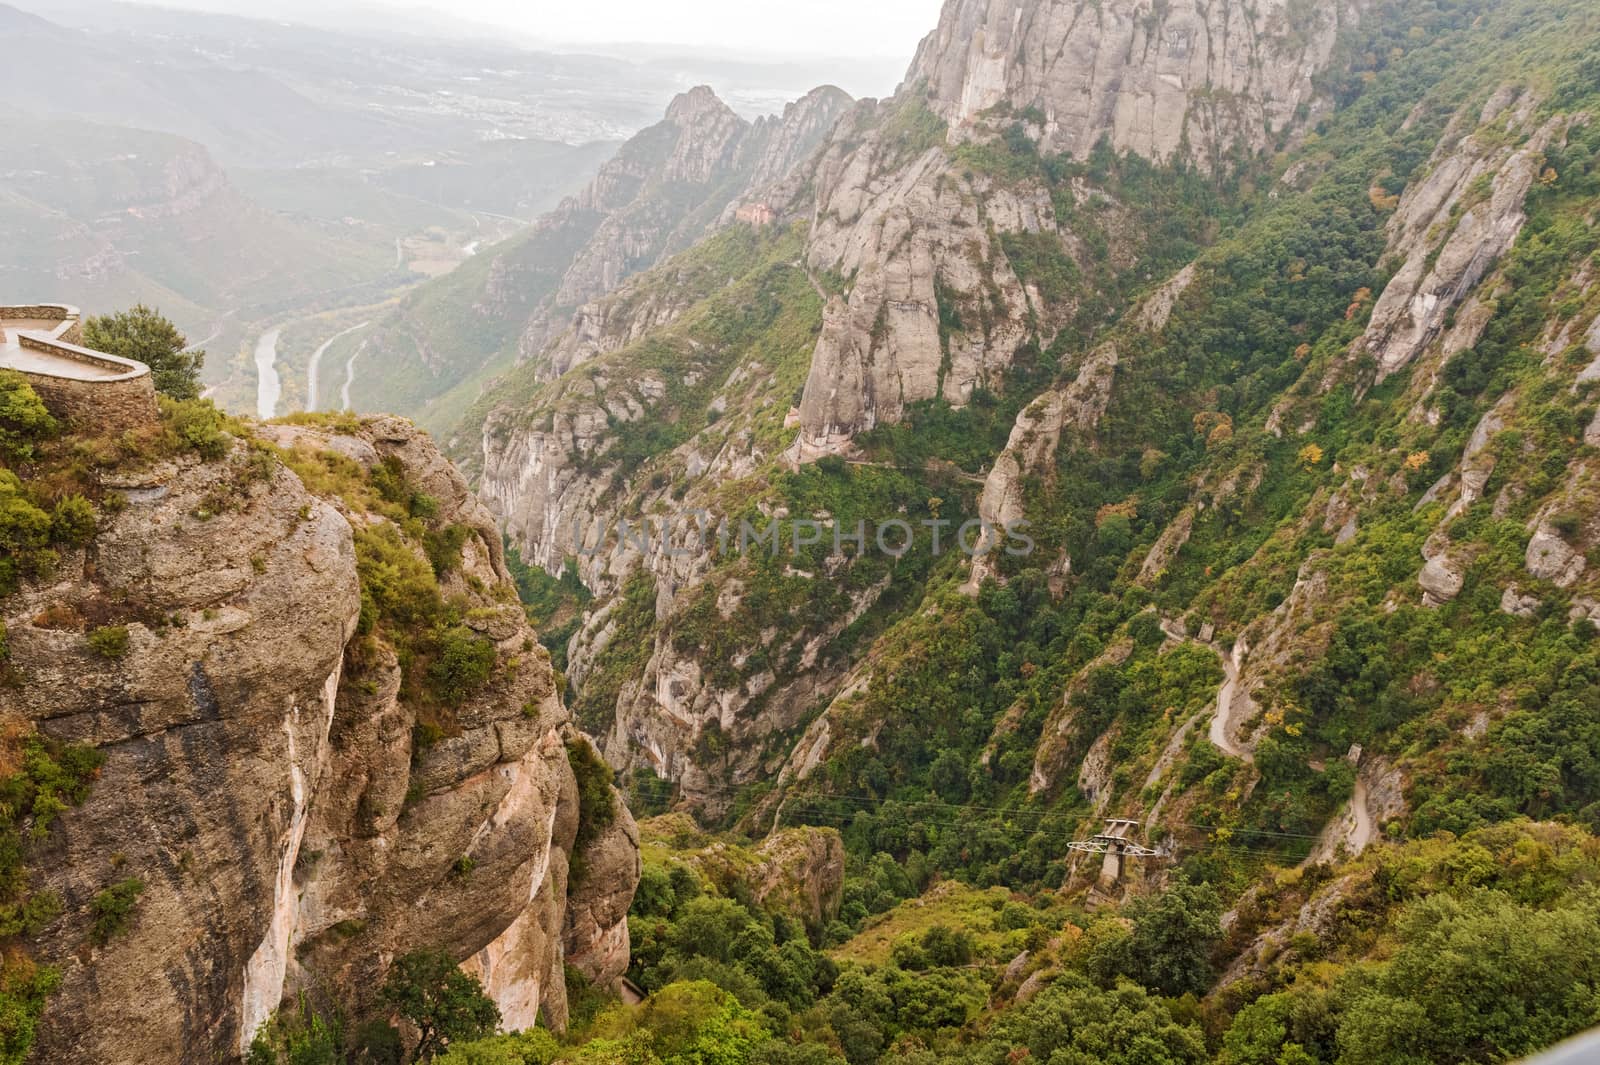  Landscape view at Montserrat. It is a multi-peaked mountain located near the city of Barcelona, in Catalonia, Spain. It is part of the Catalan Pre-Coastal Range.